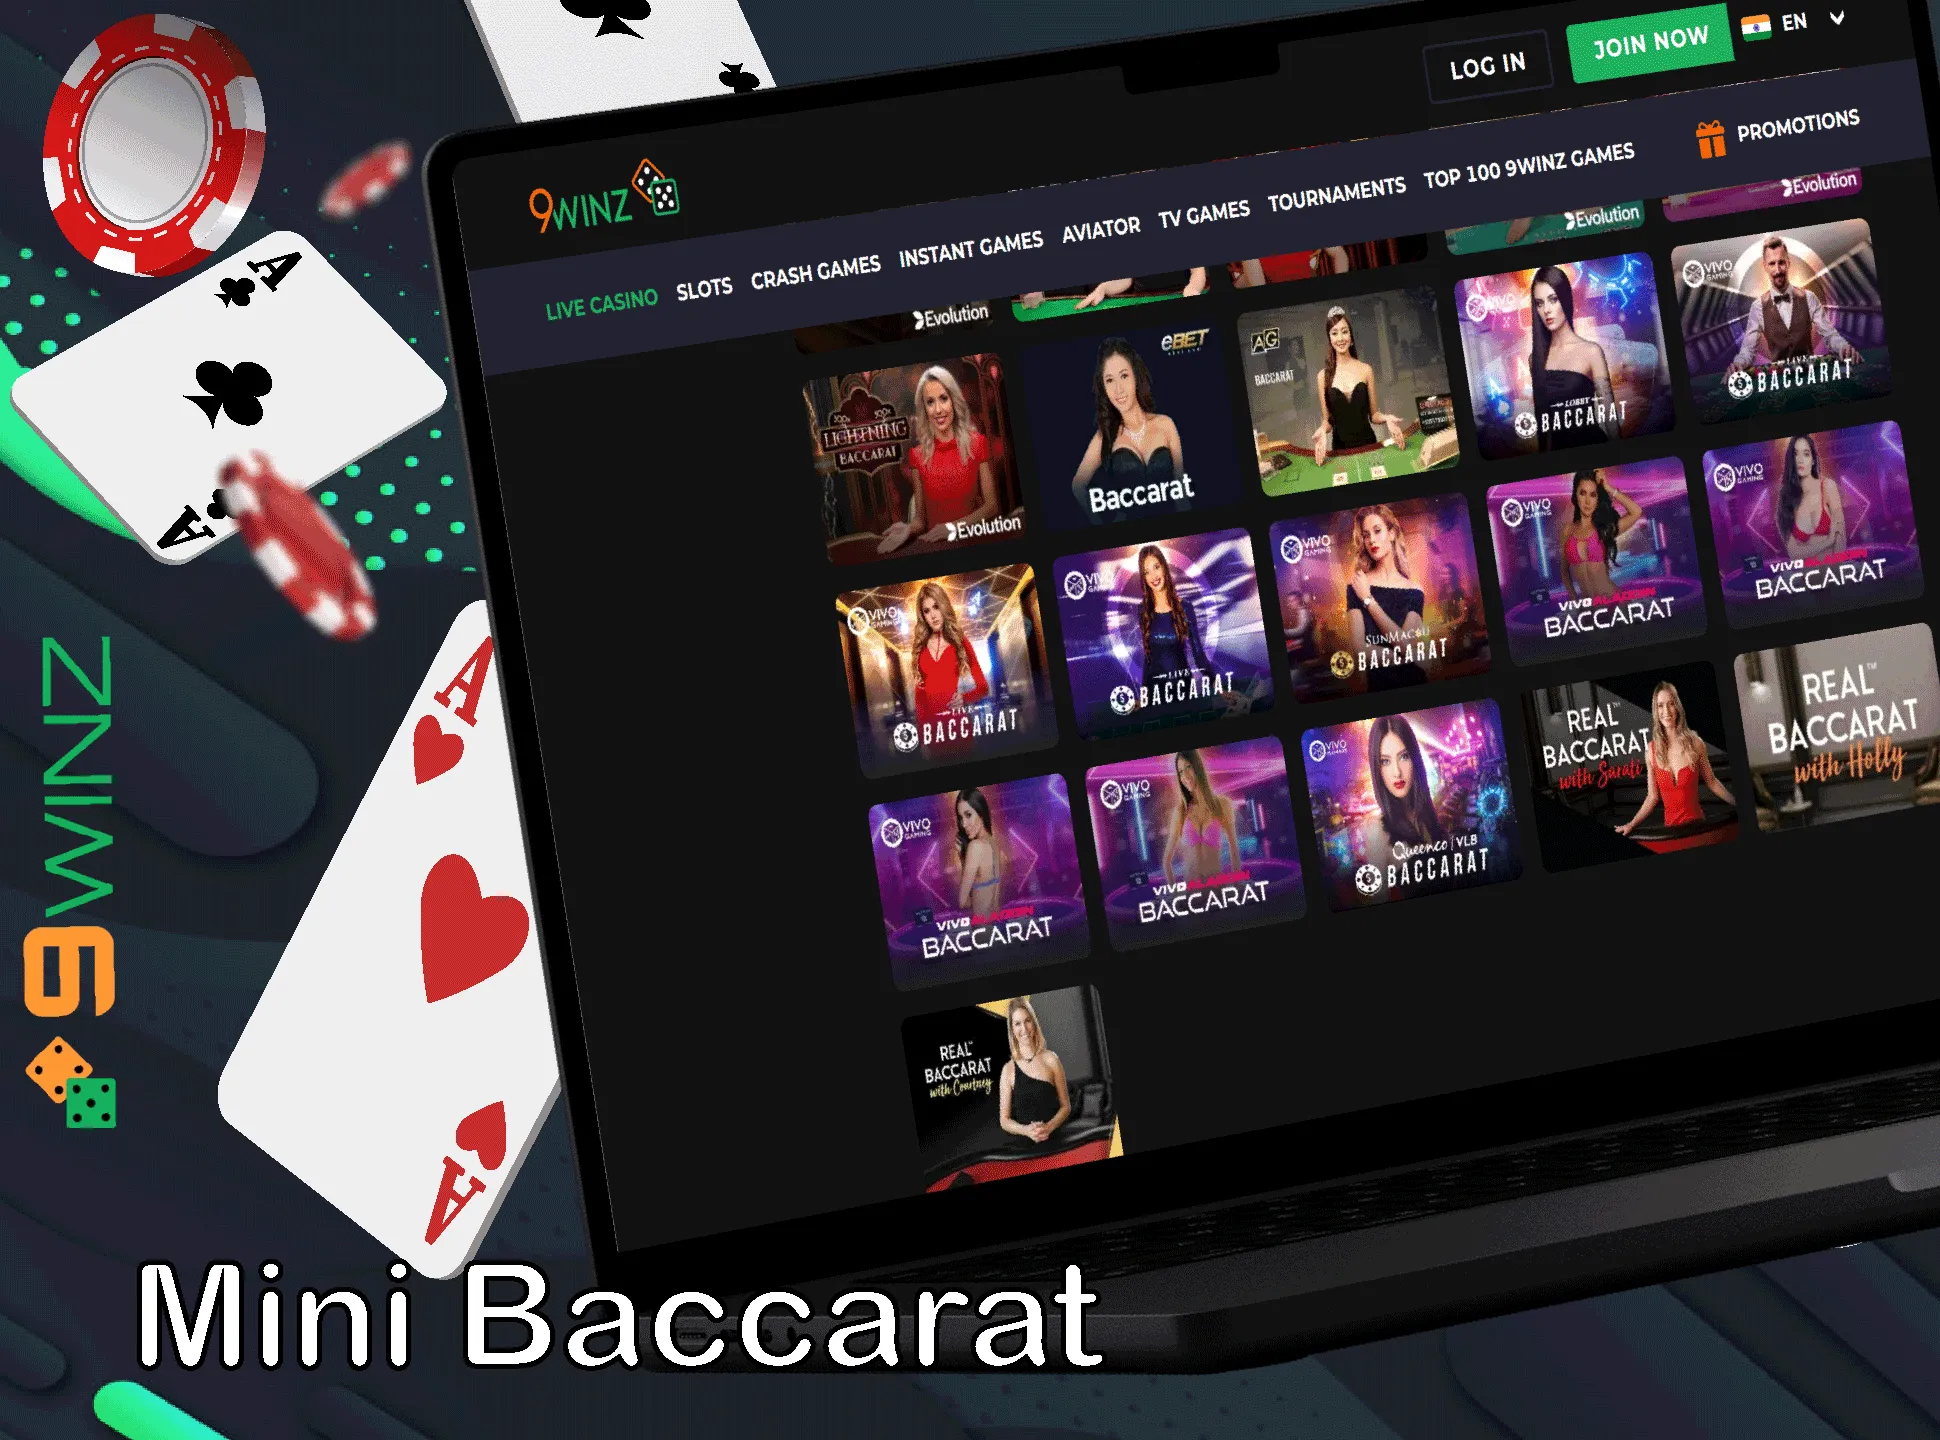 Play baccarat quicker with the 9winz mini baccarat.